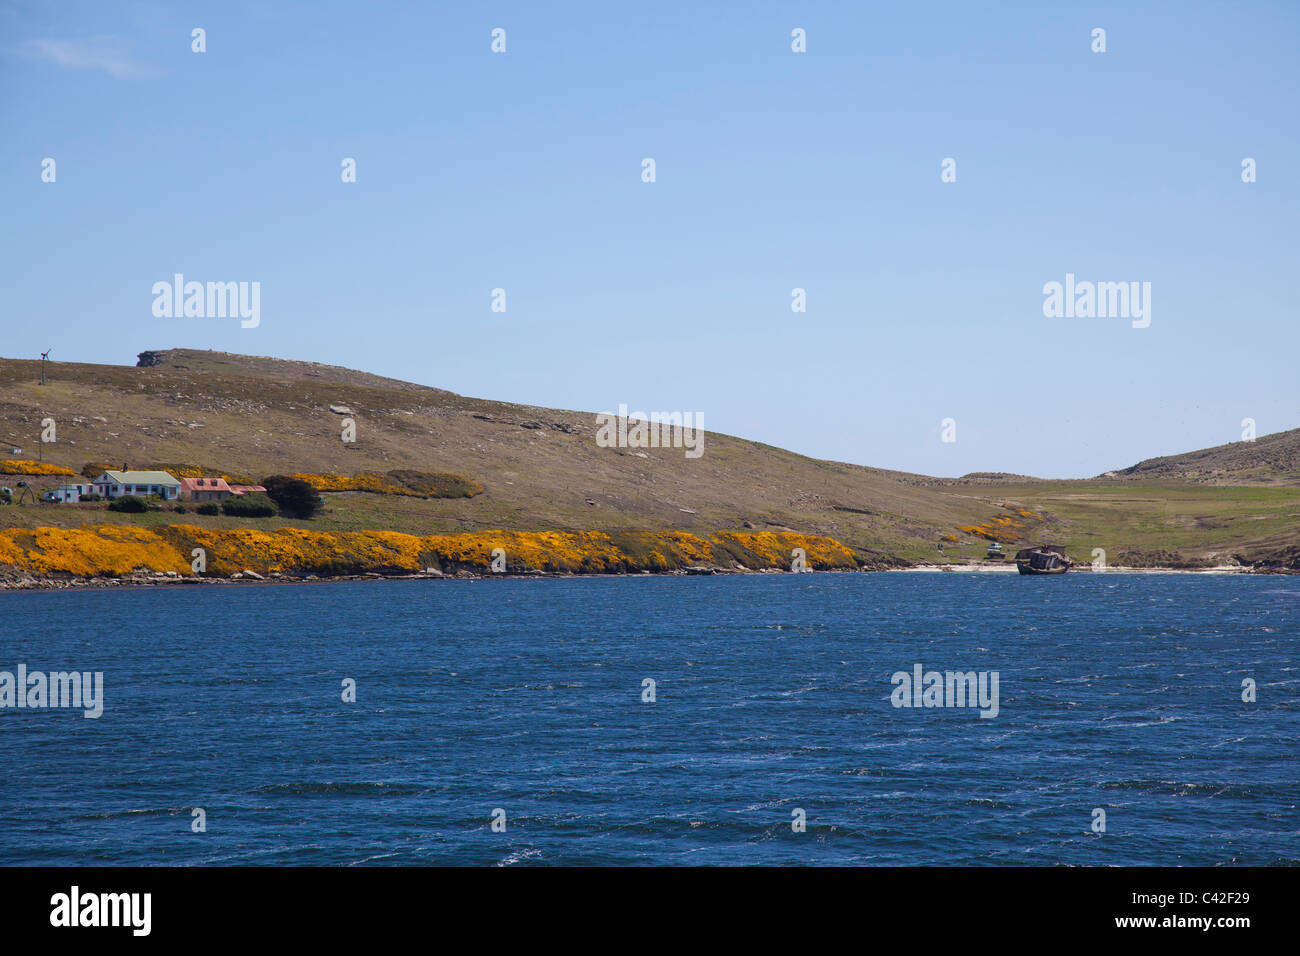 The tiny settlement at New Island, West Falklands Stock Photo